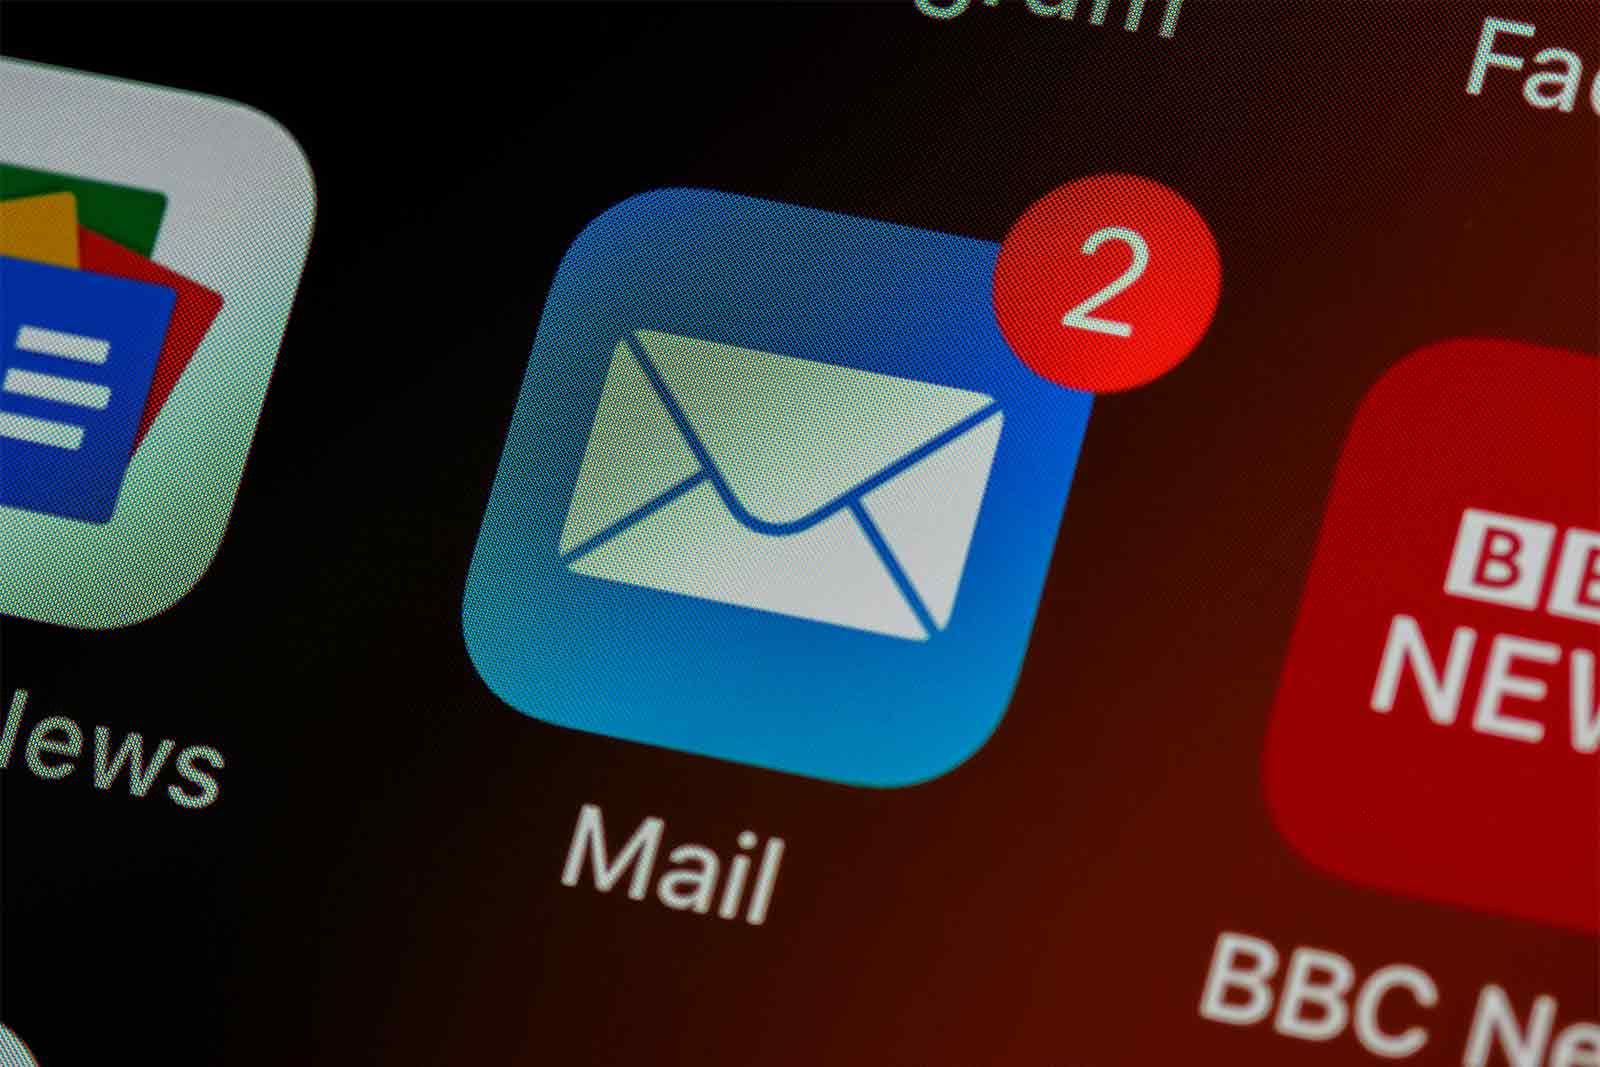 Email apps